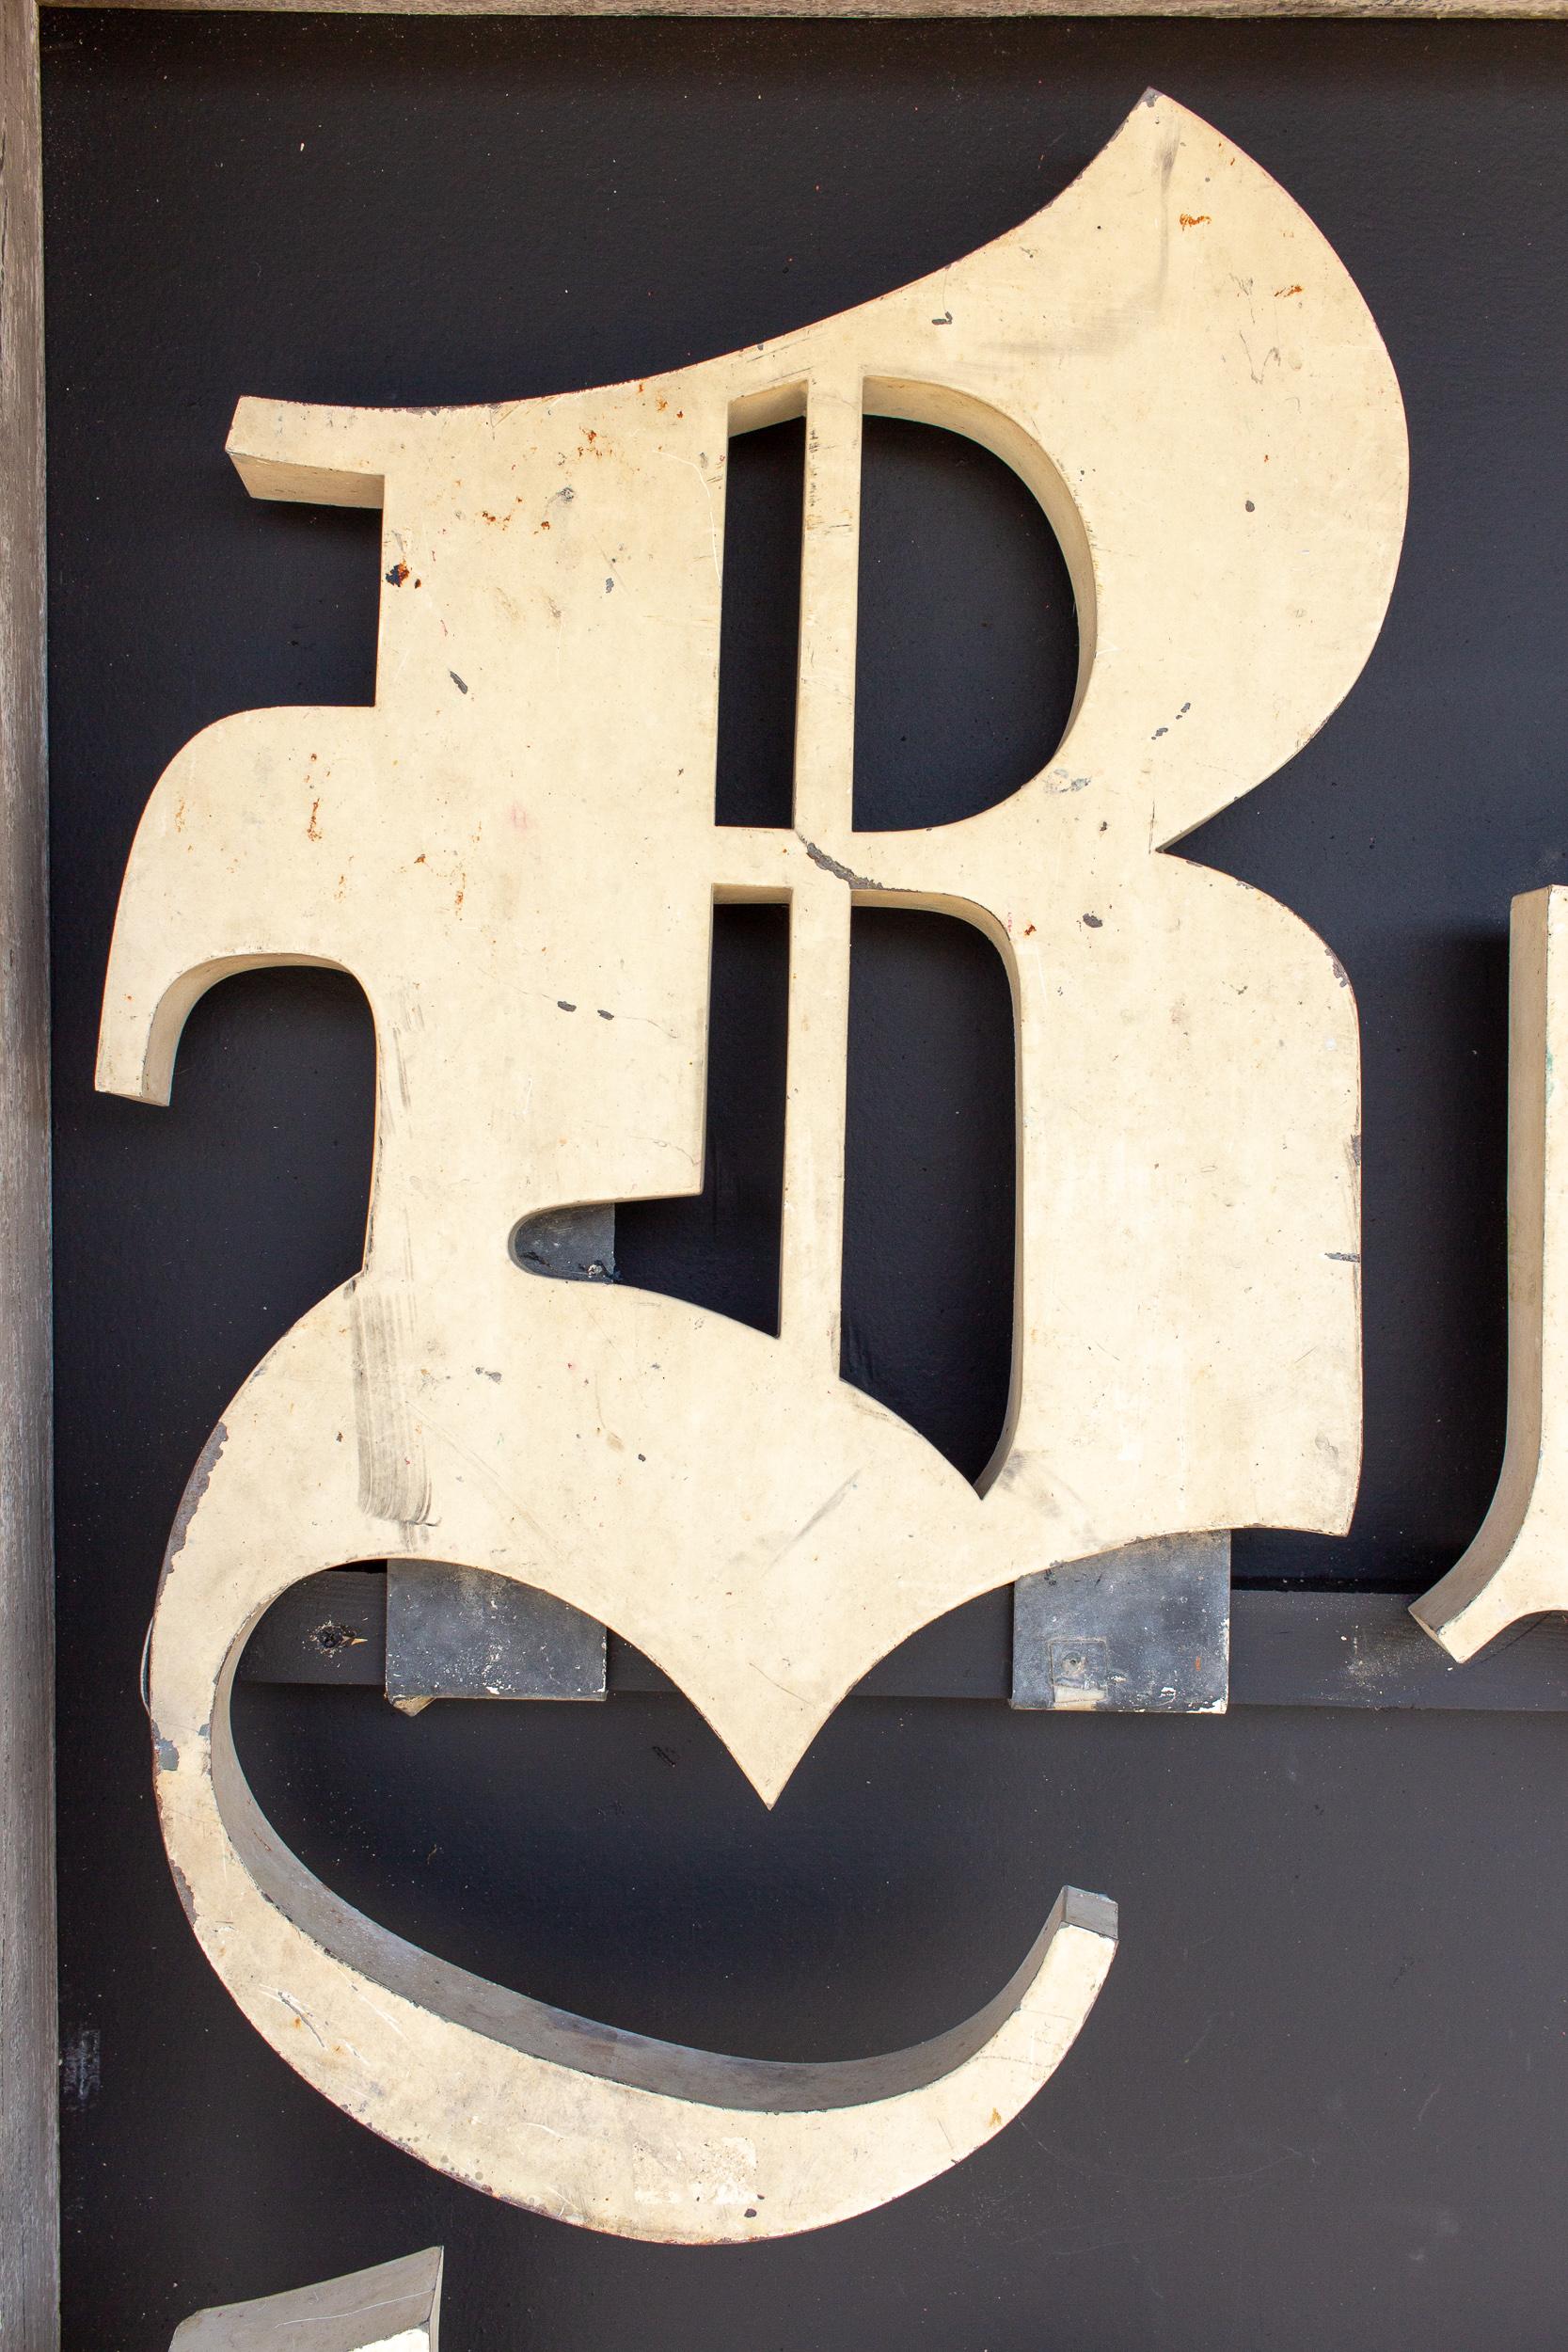 Truly a beautiful discovery during our recent travels, this is an antique set of Boulangerie large scale shop letters that once hung in a Parisian Boulangerie (where the baguettes of bread are made!).  Mounted and hung as art on a contrasting, matte